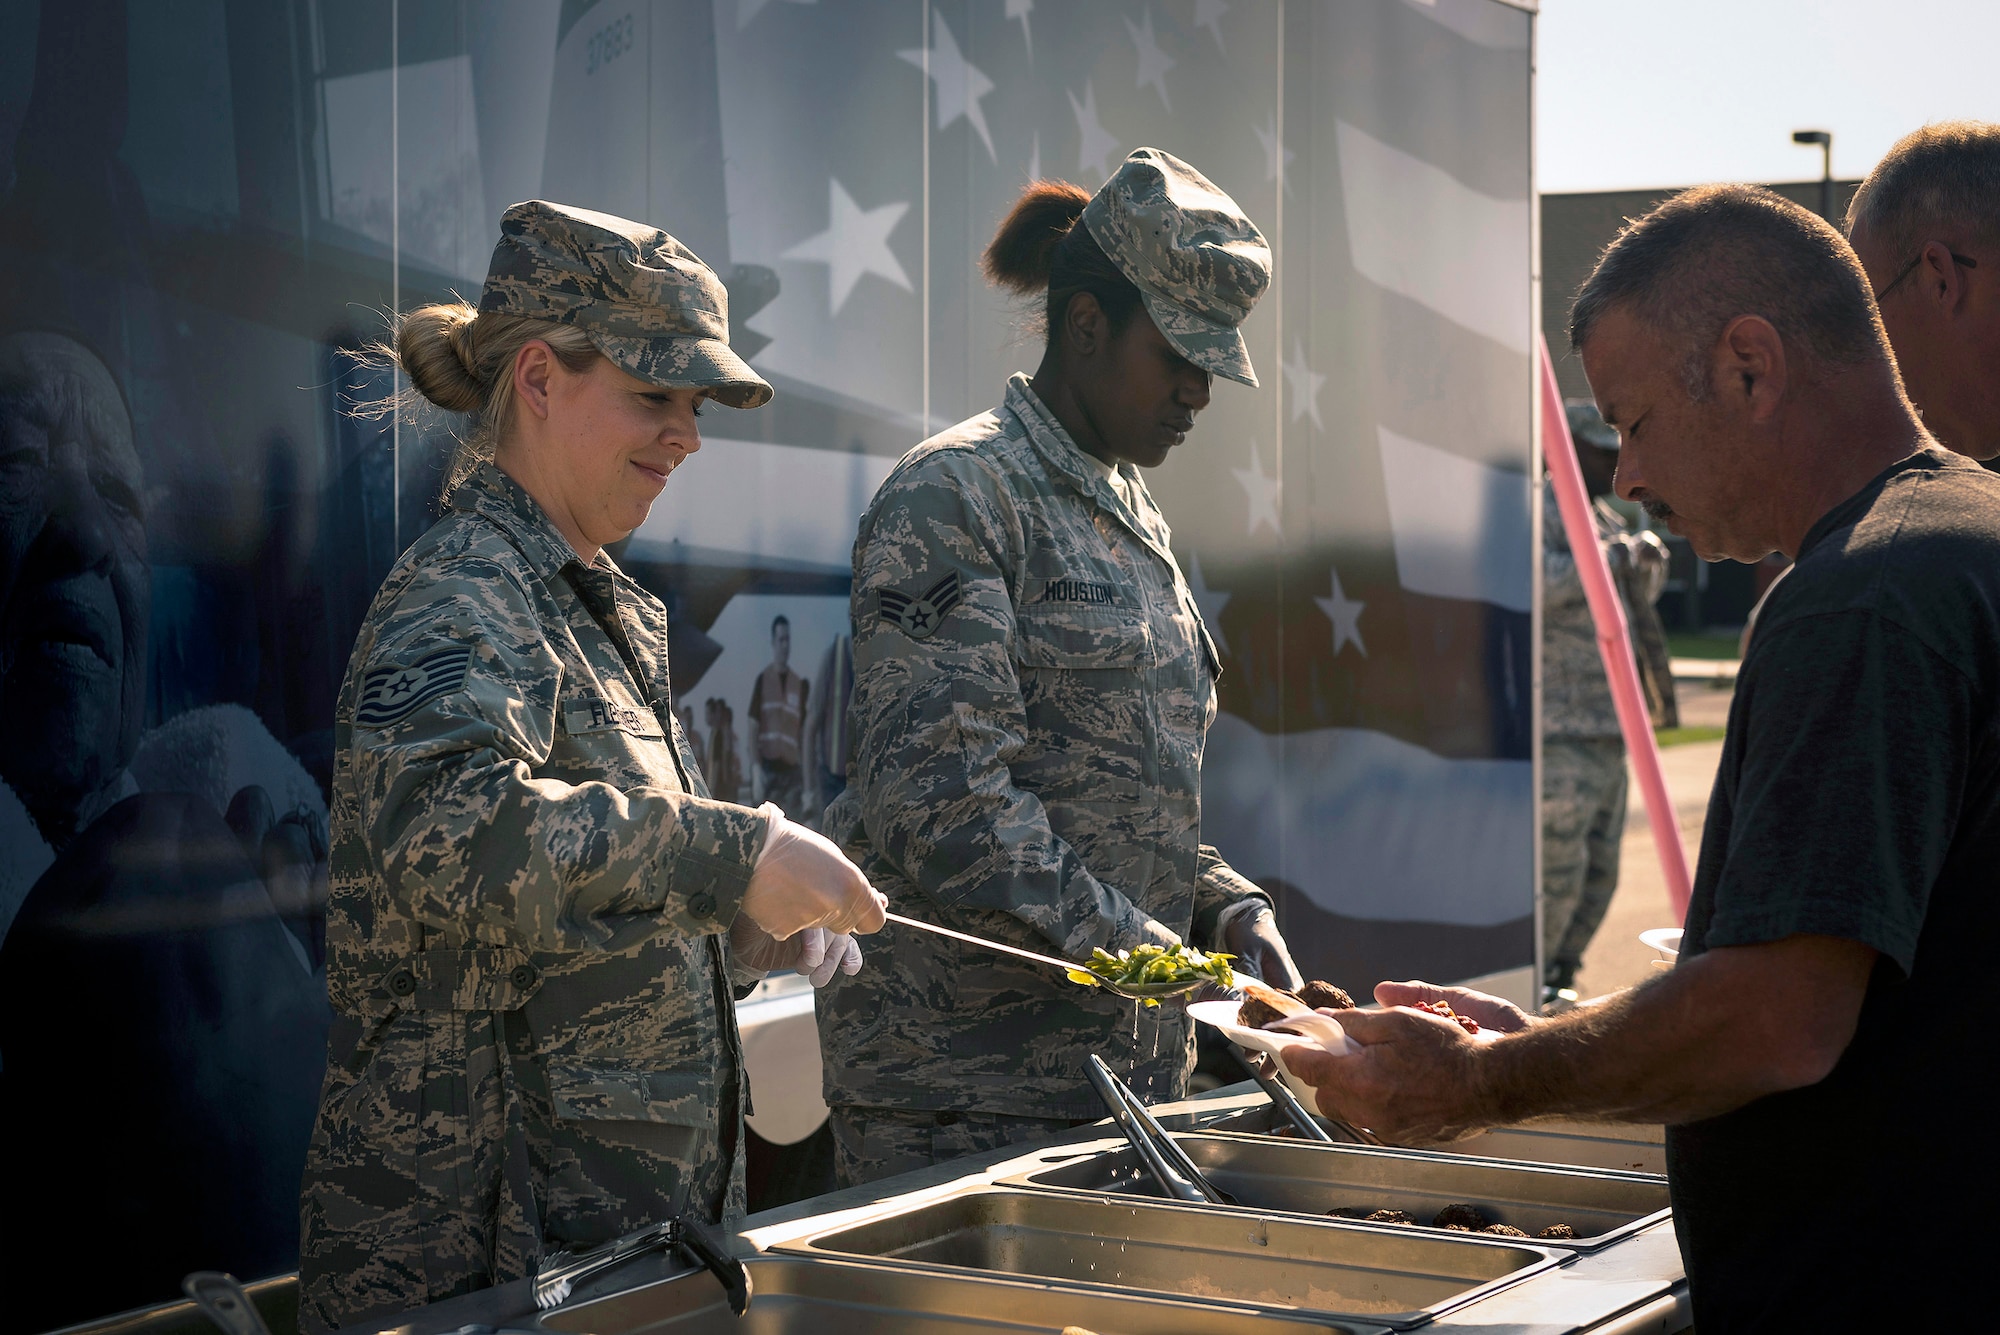 U.S. Air Force Tech. Sgt. Montana Fleissner, left, a services specialist with the 107th Force Support Squadron, New York Air National Guard, and Senior Airman Maya Houston, a services specialist with the 182nd Force Support Squadron, Illinois Air National Guard, serve dinner in Crow Agency, Mont., Aug. 1, 2017. They and six other services specialists provided meal support to 182nd Civil Engineer Squadron Airmen building veterans’ homes for the Innovative Readiness Training program. (U.S. Air National Guard photo by Tech. Sgt. Lealan Buehrer)